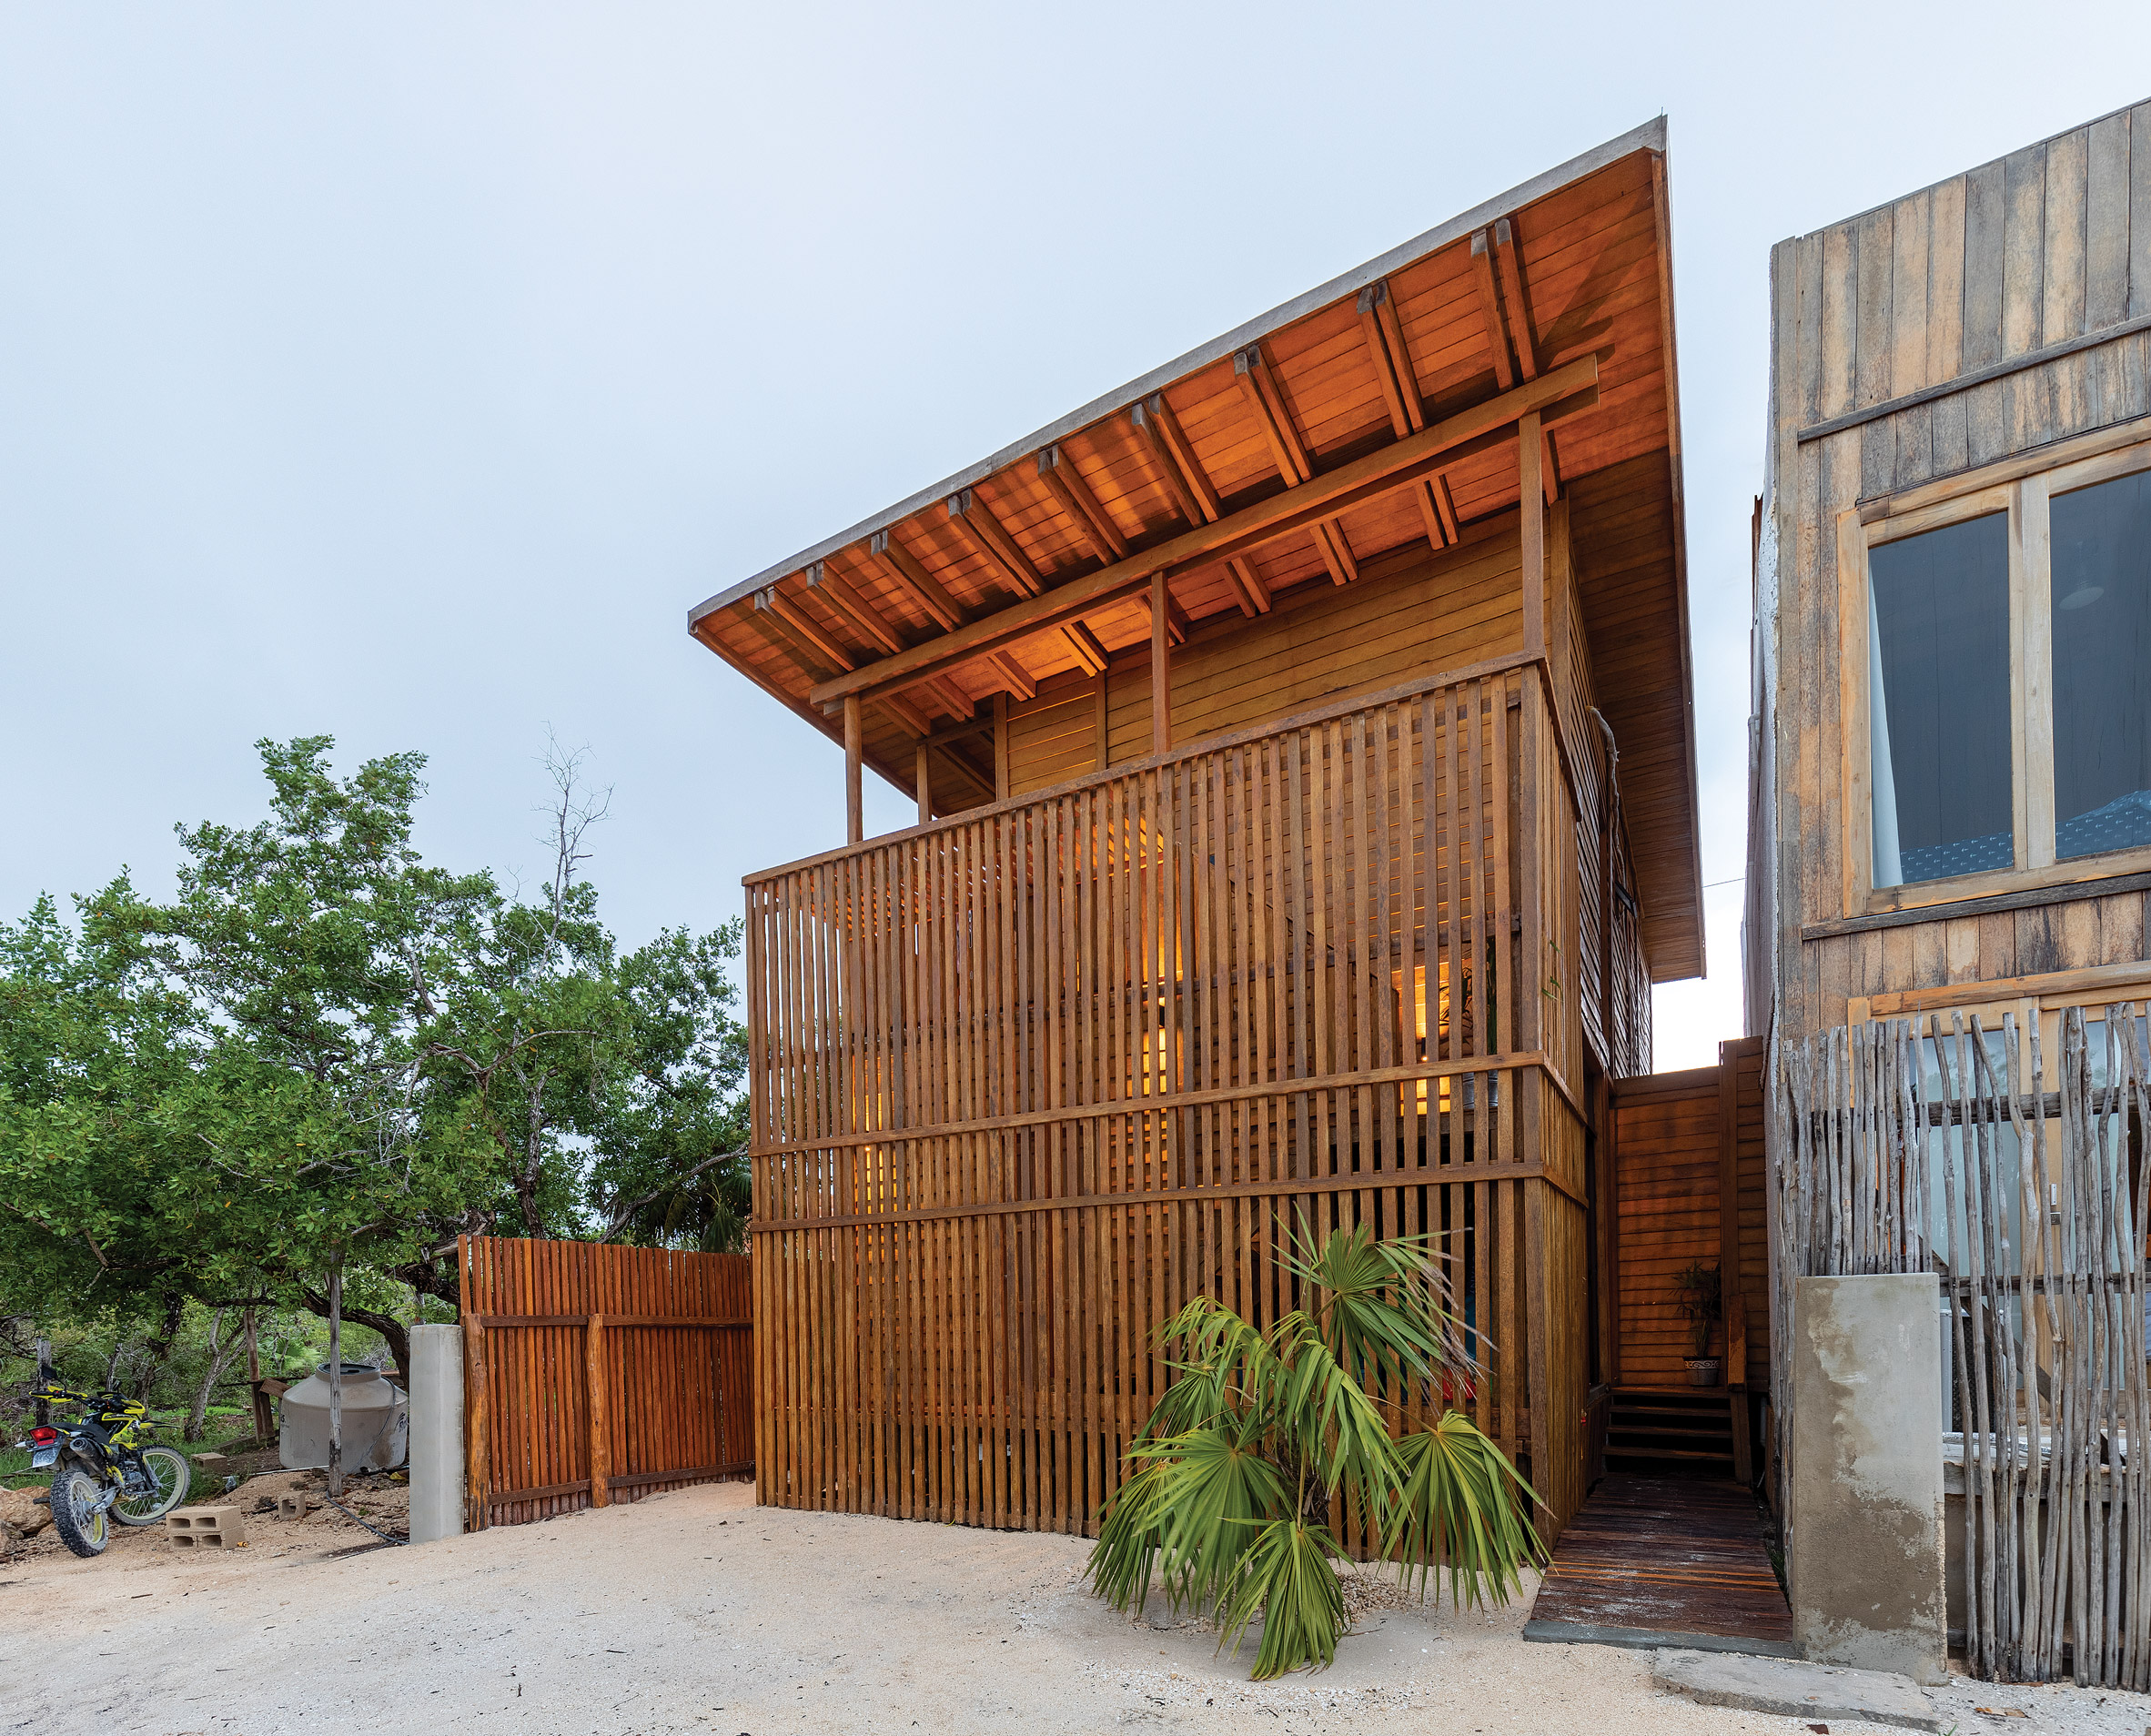 Exterior of Mexican coconut palm wood house wrapped in latticework